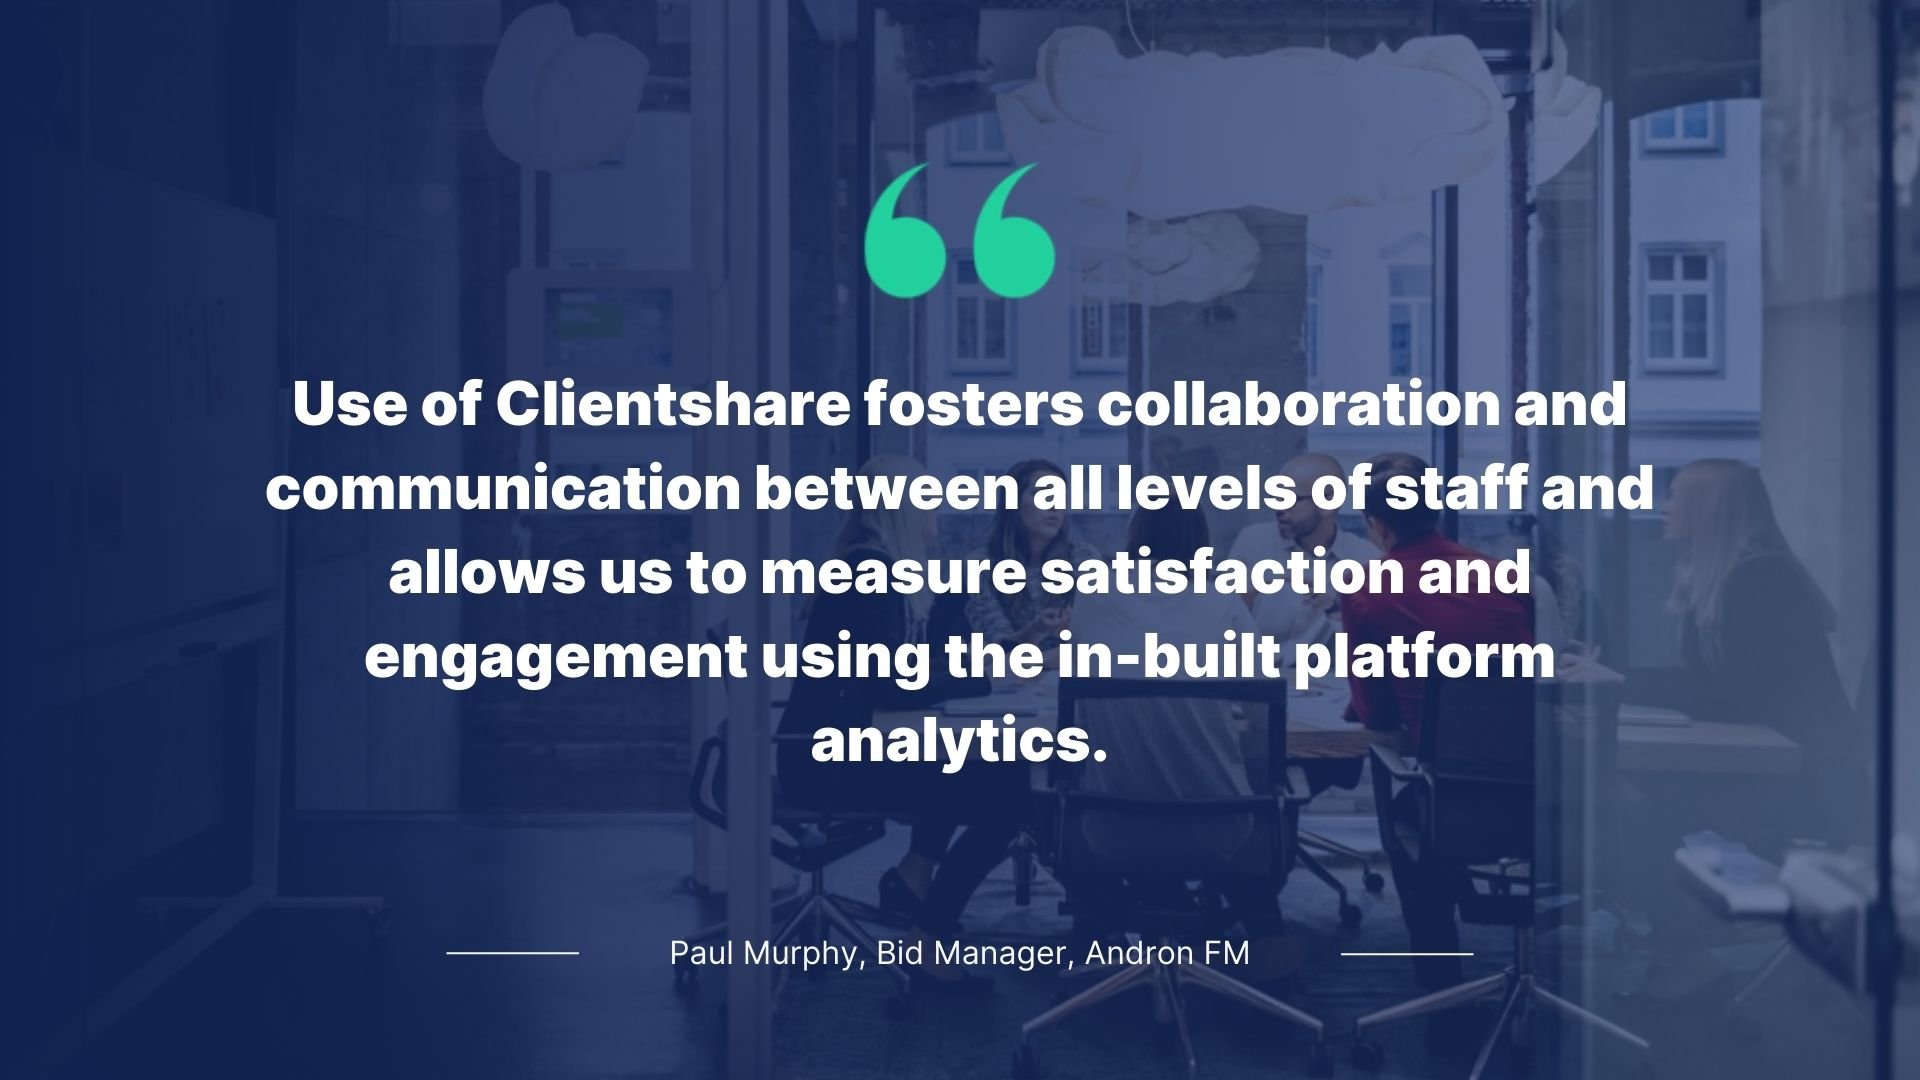 Quote by Paul Murphy, Bid Manager, Andron FM: Use of Clientshare fosters collaboration and communication between all levels of staff and allows us to measure satisfaction and engagement using the in-built platform analytics.